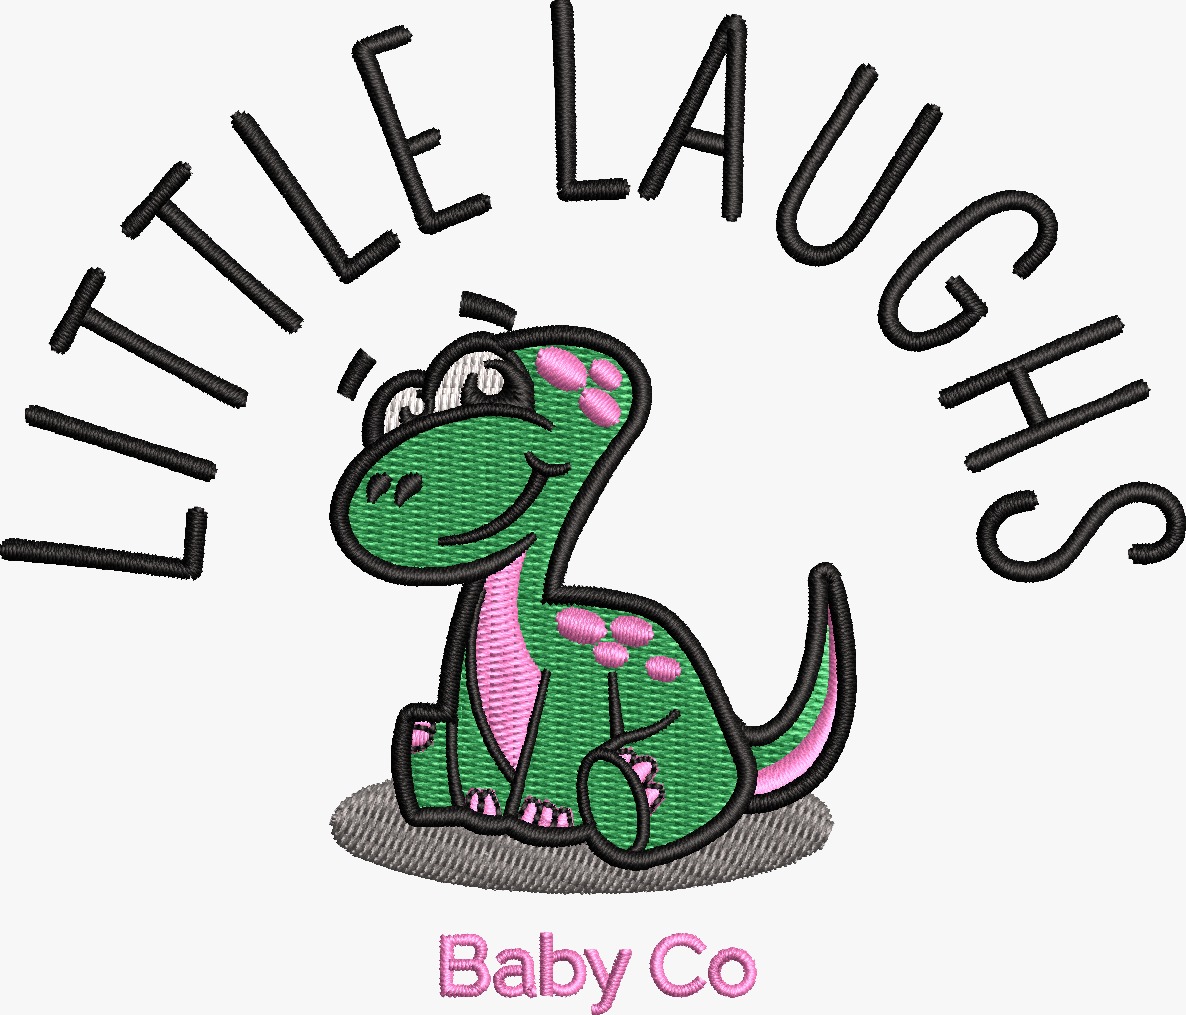 Baby co embroidery design - customer embroidery